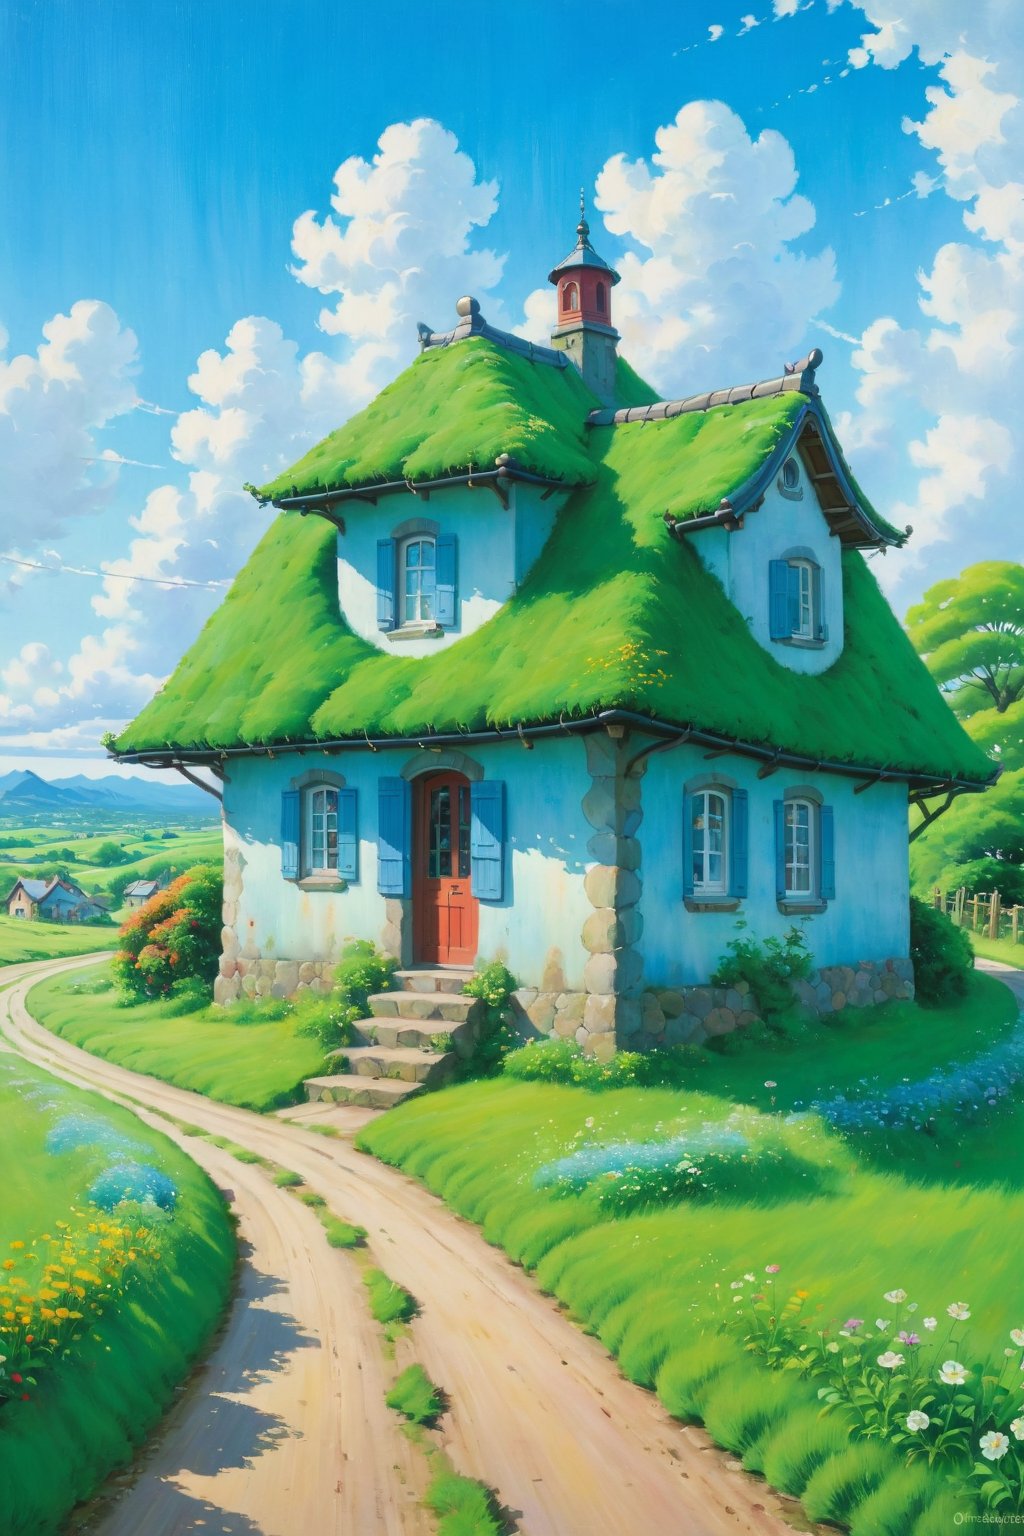 (best quality,high-res,realistic:1.2) oil painting, vibrant colors, detailed brushstrokes, serene atmosphere, dream-like scenery, perspective view, lush green grassland, blooming petals, clear blue sky, winding country road, charming building, Studio Ghibli-inspired, Hayao Miyazaki-esque.